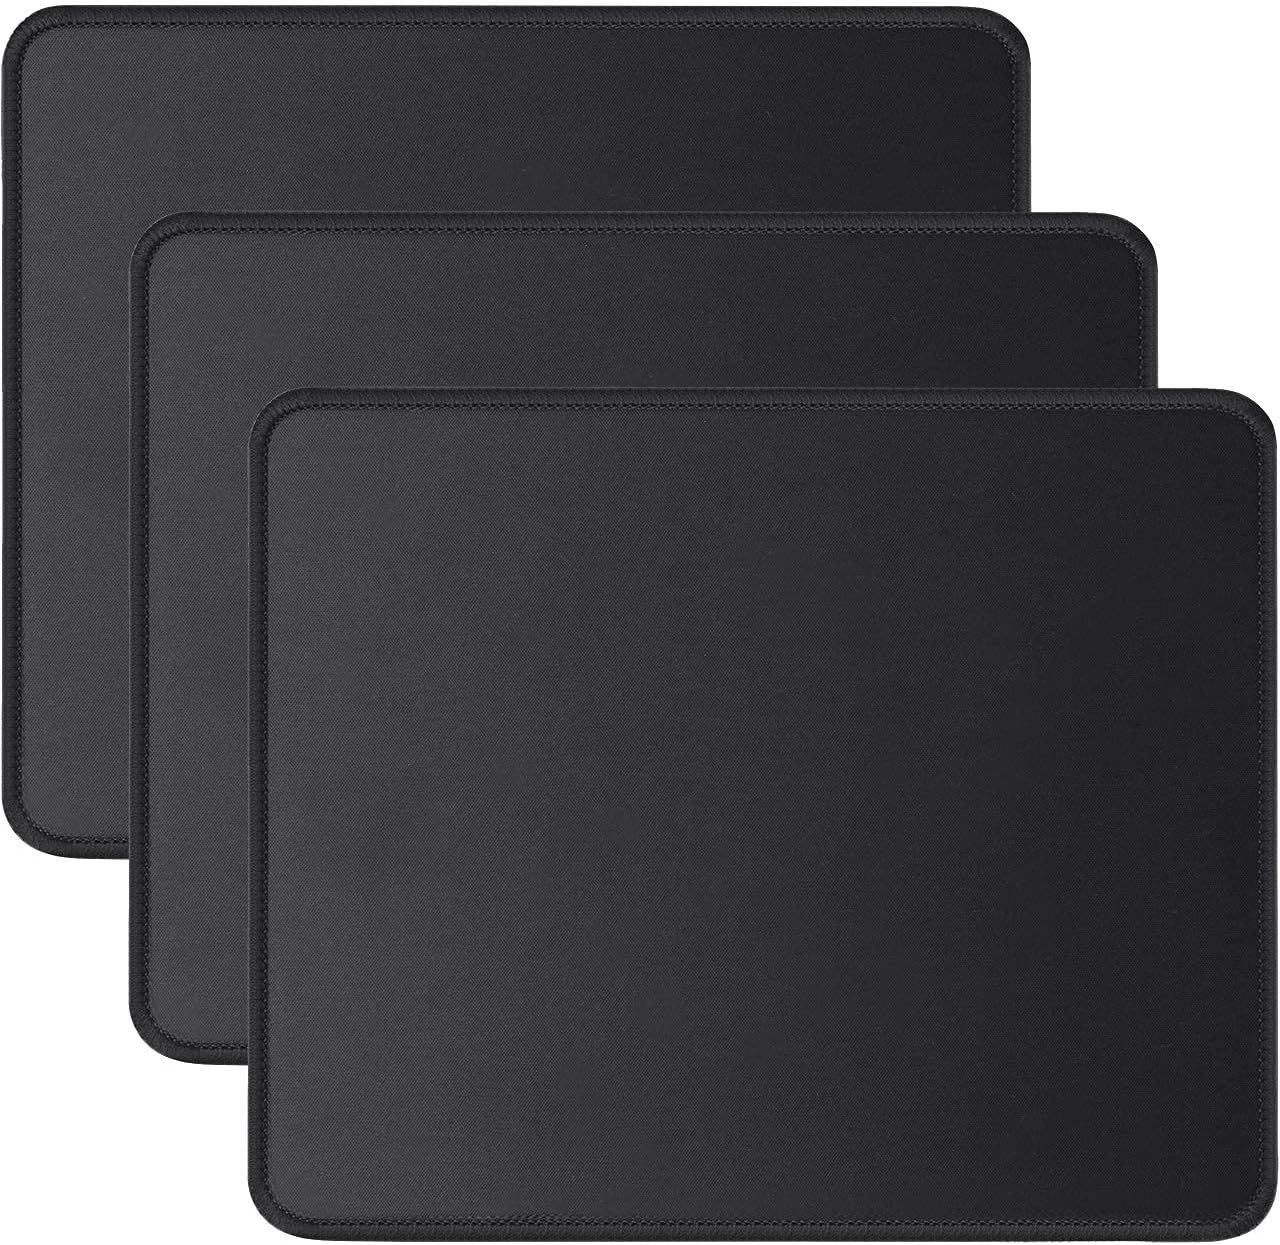 JIKIOU 3 Pack Mouse Pad with Stitched Edge, Comfortable Mouse Pads with Non-Slip Rubber Base, Washable Mousepads Bulk with Lycra Cloth, Mouse Pads for Computers Laptop Mouse 10.2x8.3x0.12inch Black